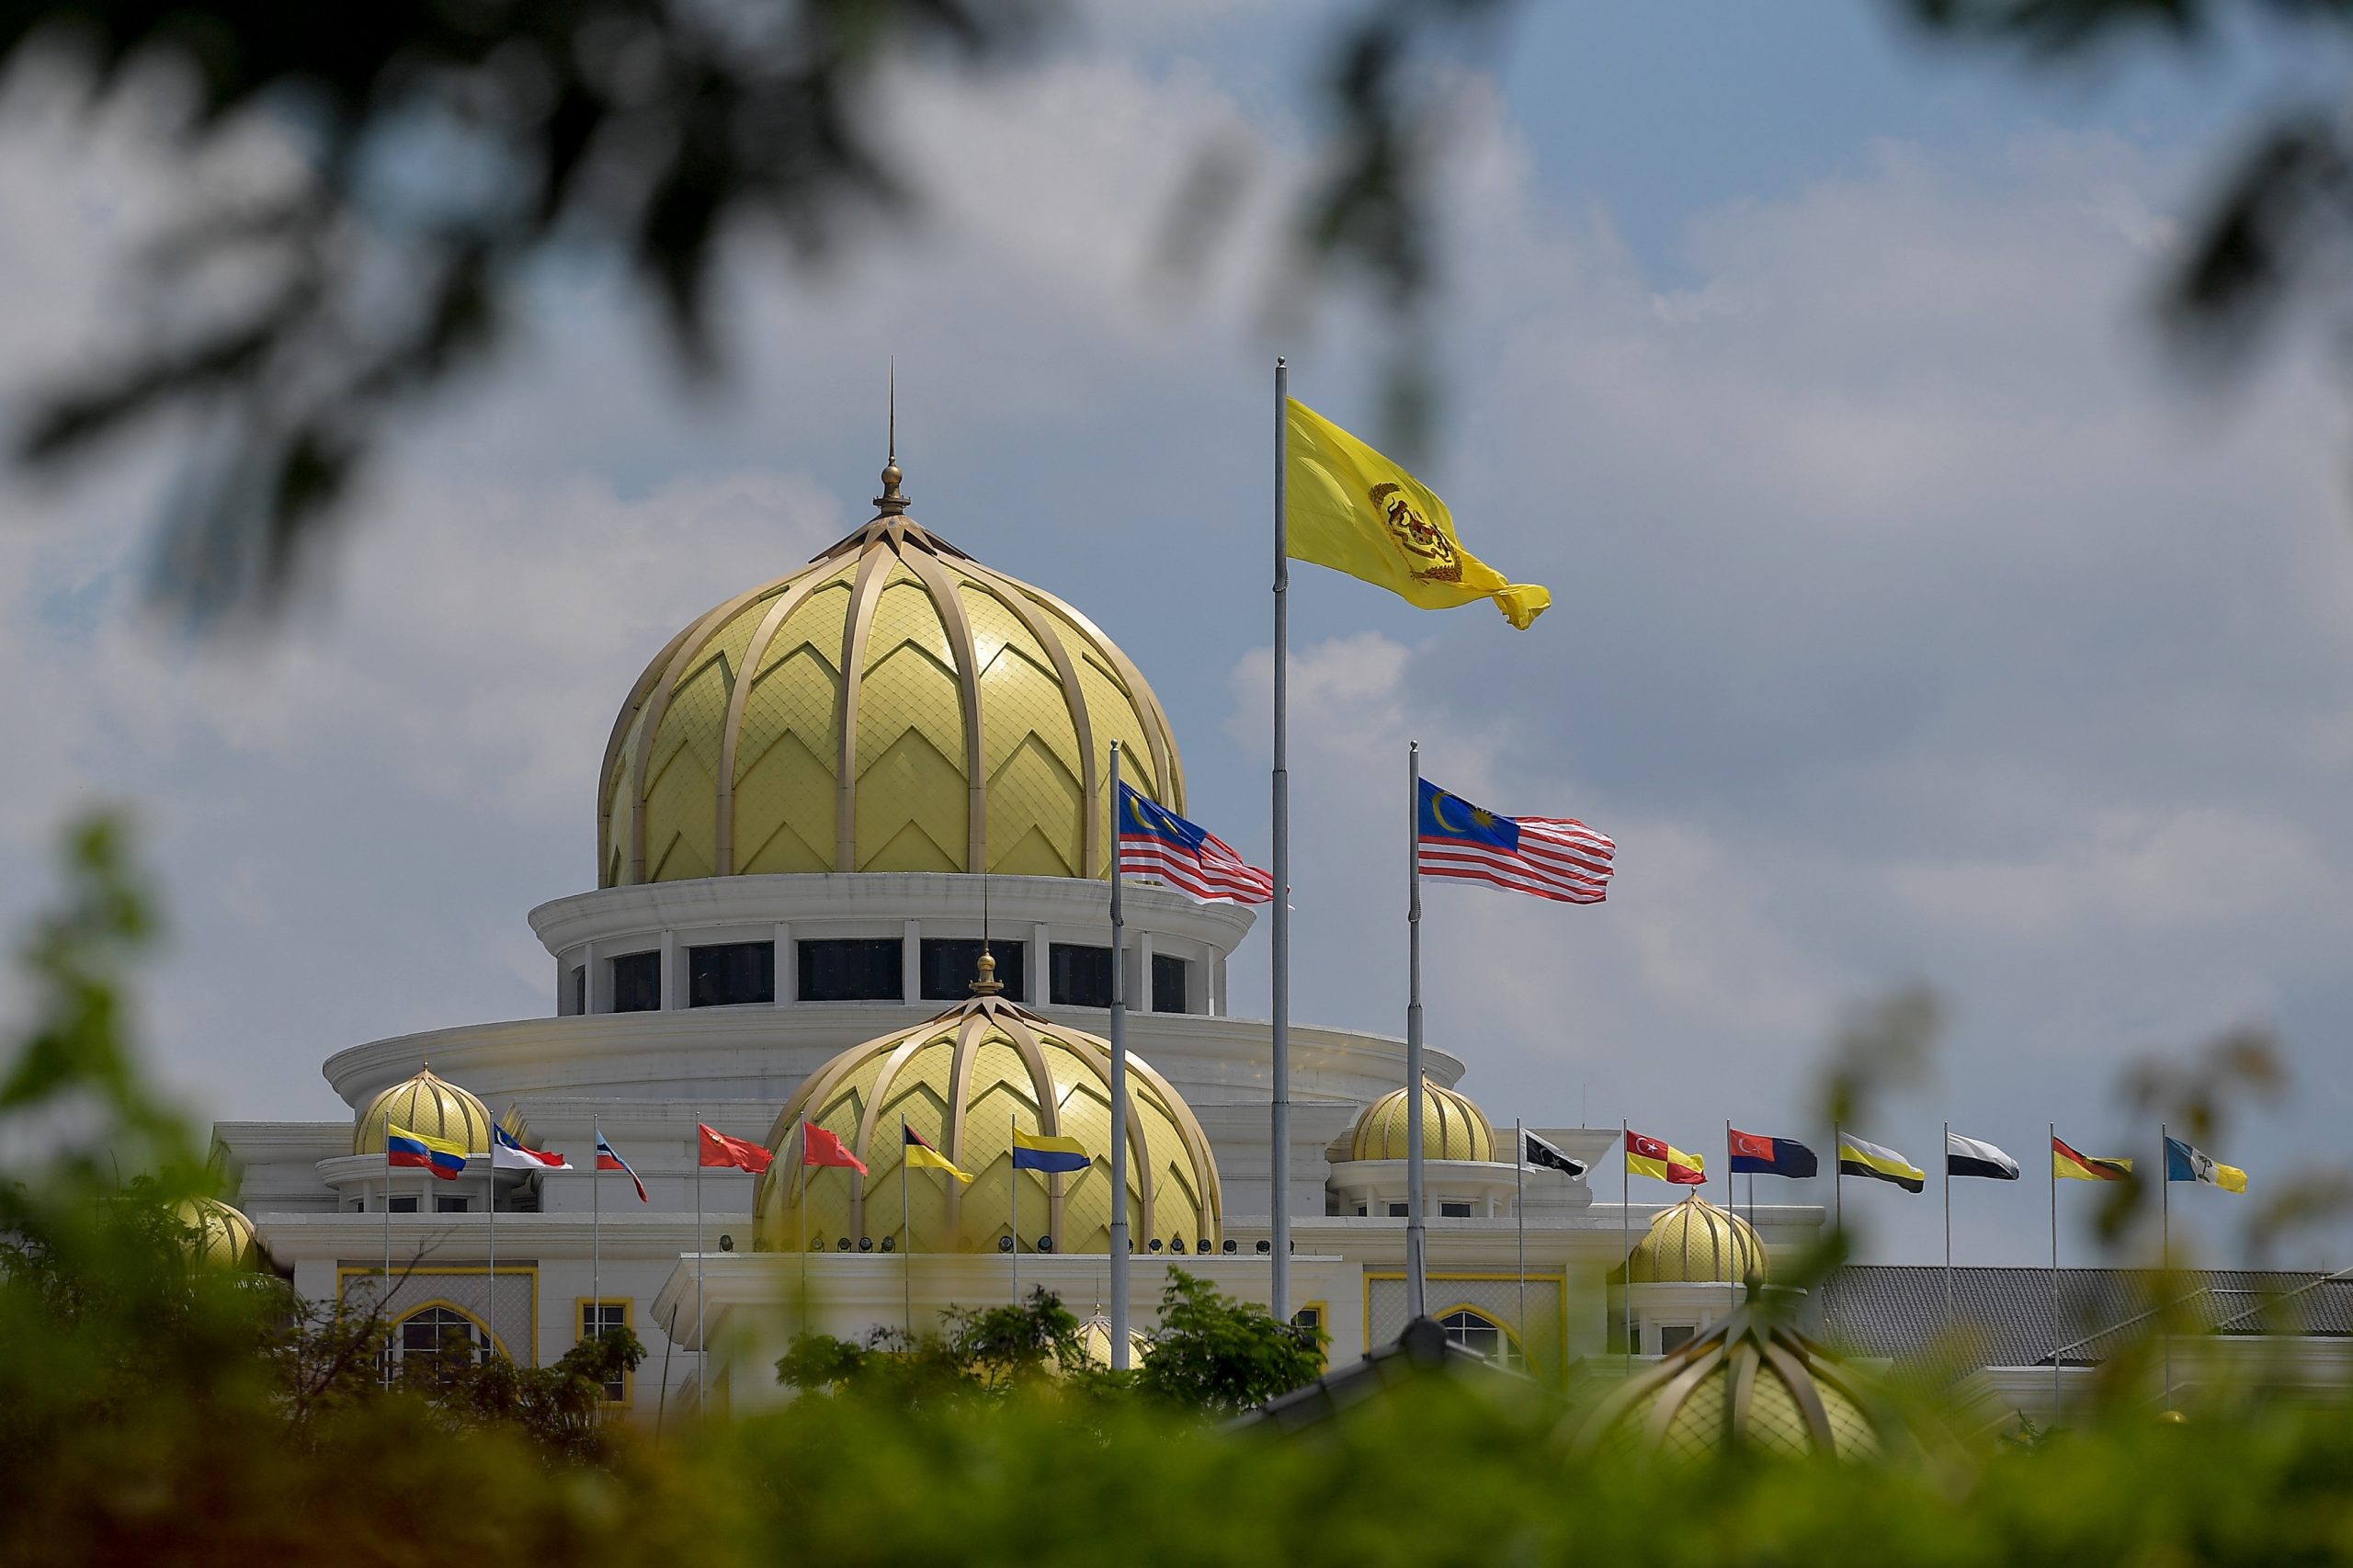 PM Appointment: Special Meeting of Malay Rulers at Malaysia’s Istana Negara on Thursday